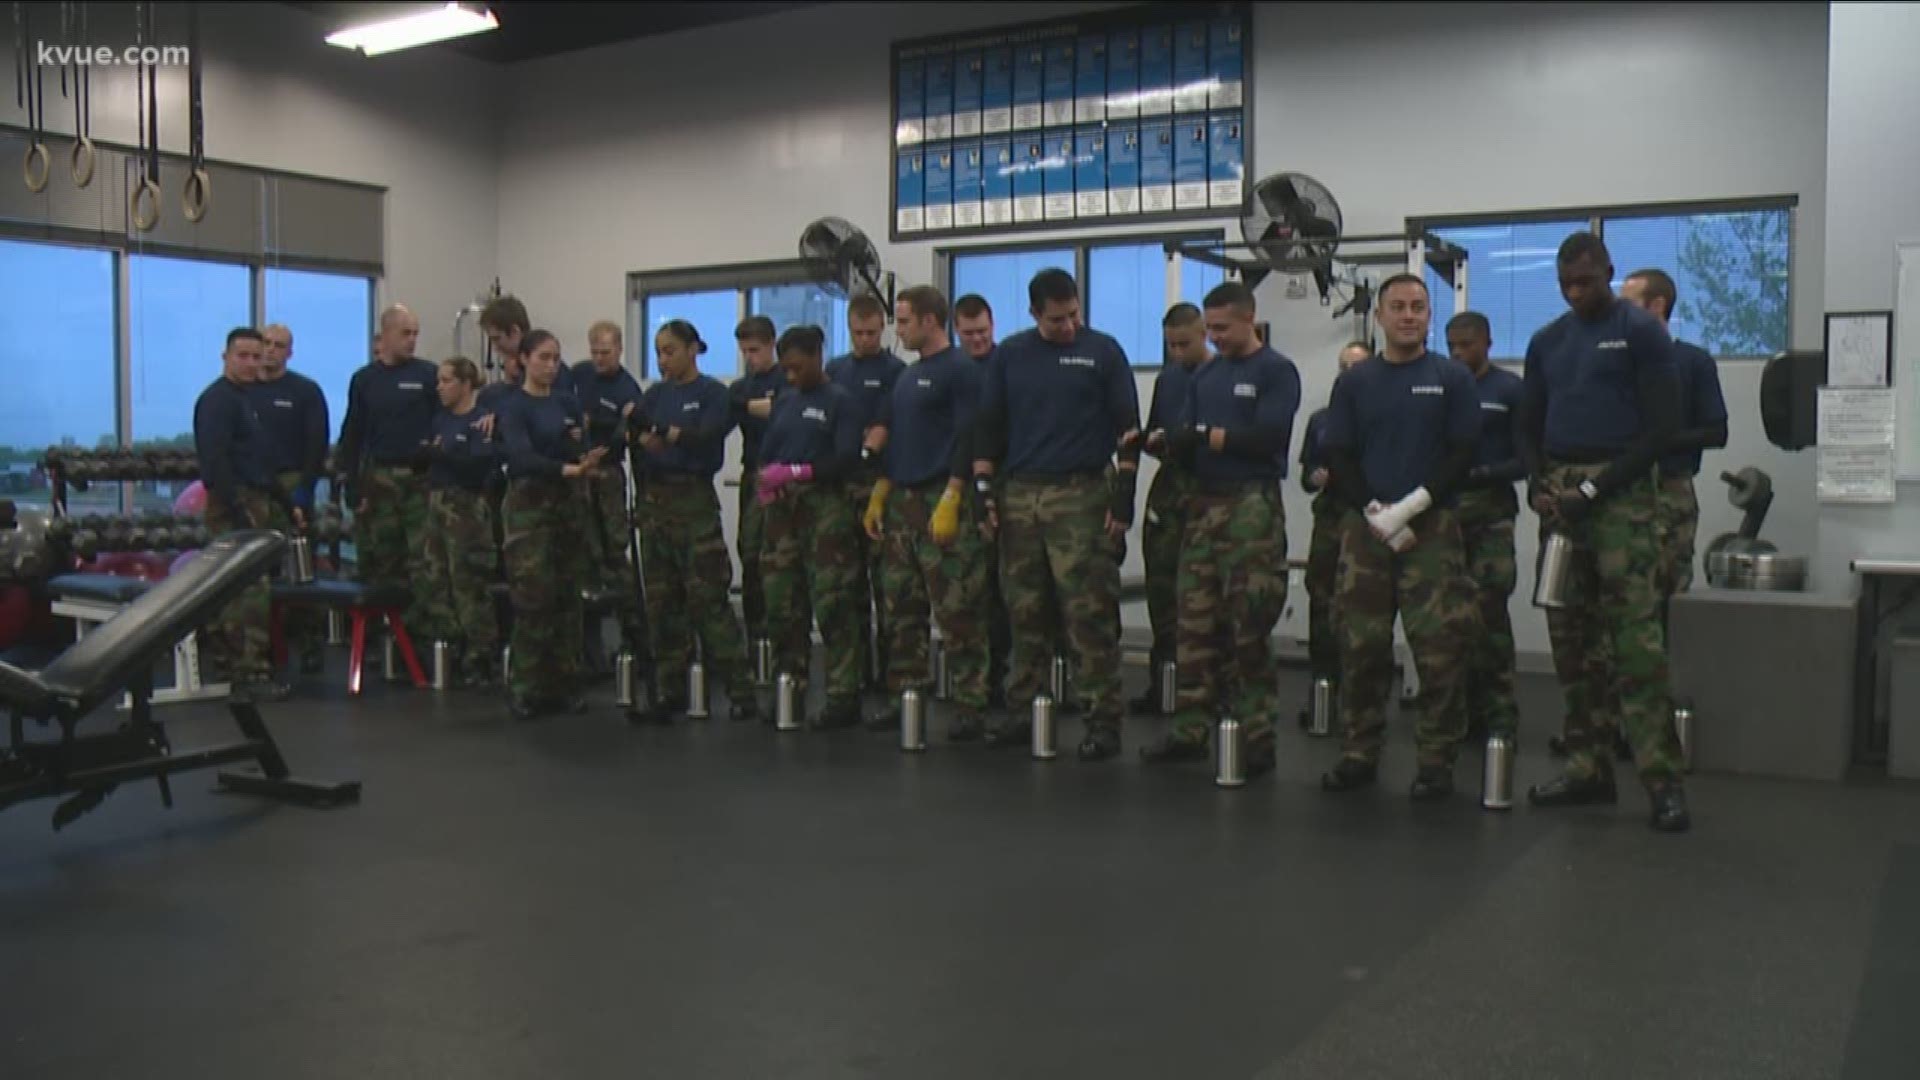 Austin police officials are looking into what led five cadets to fall ill during the APD training academy yesterday.